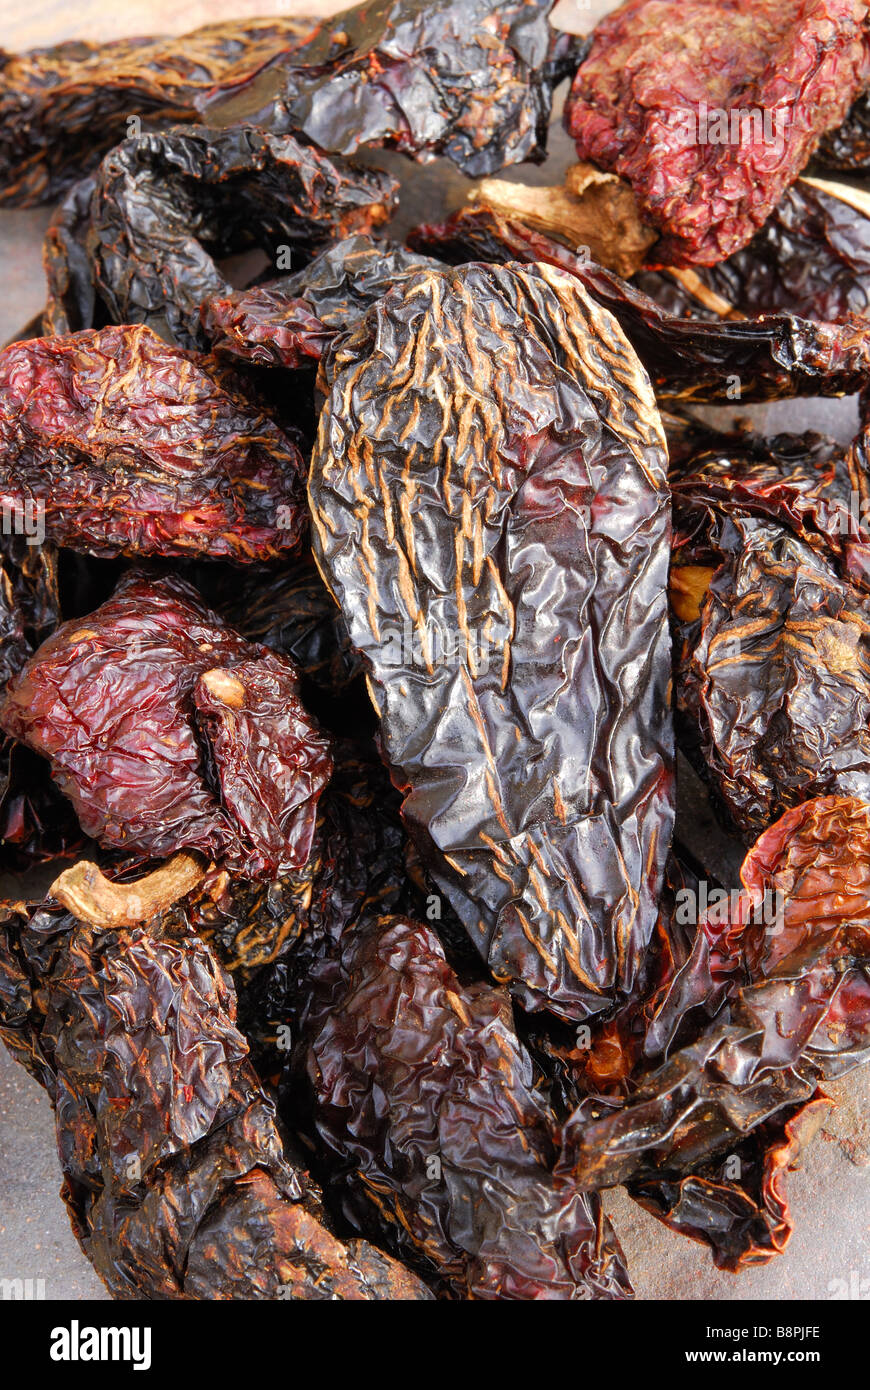 Chipotle 'Moritas'. Dried, smoked jalapeno chillies used to add a smoky heat to Mexican and TexMex dishes. Stock Photo